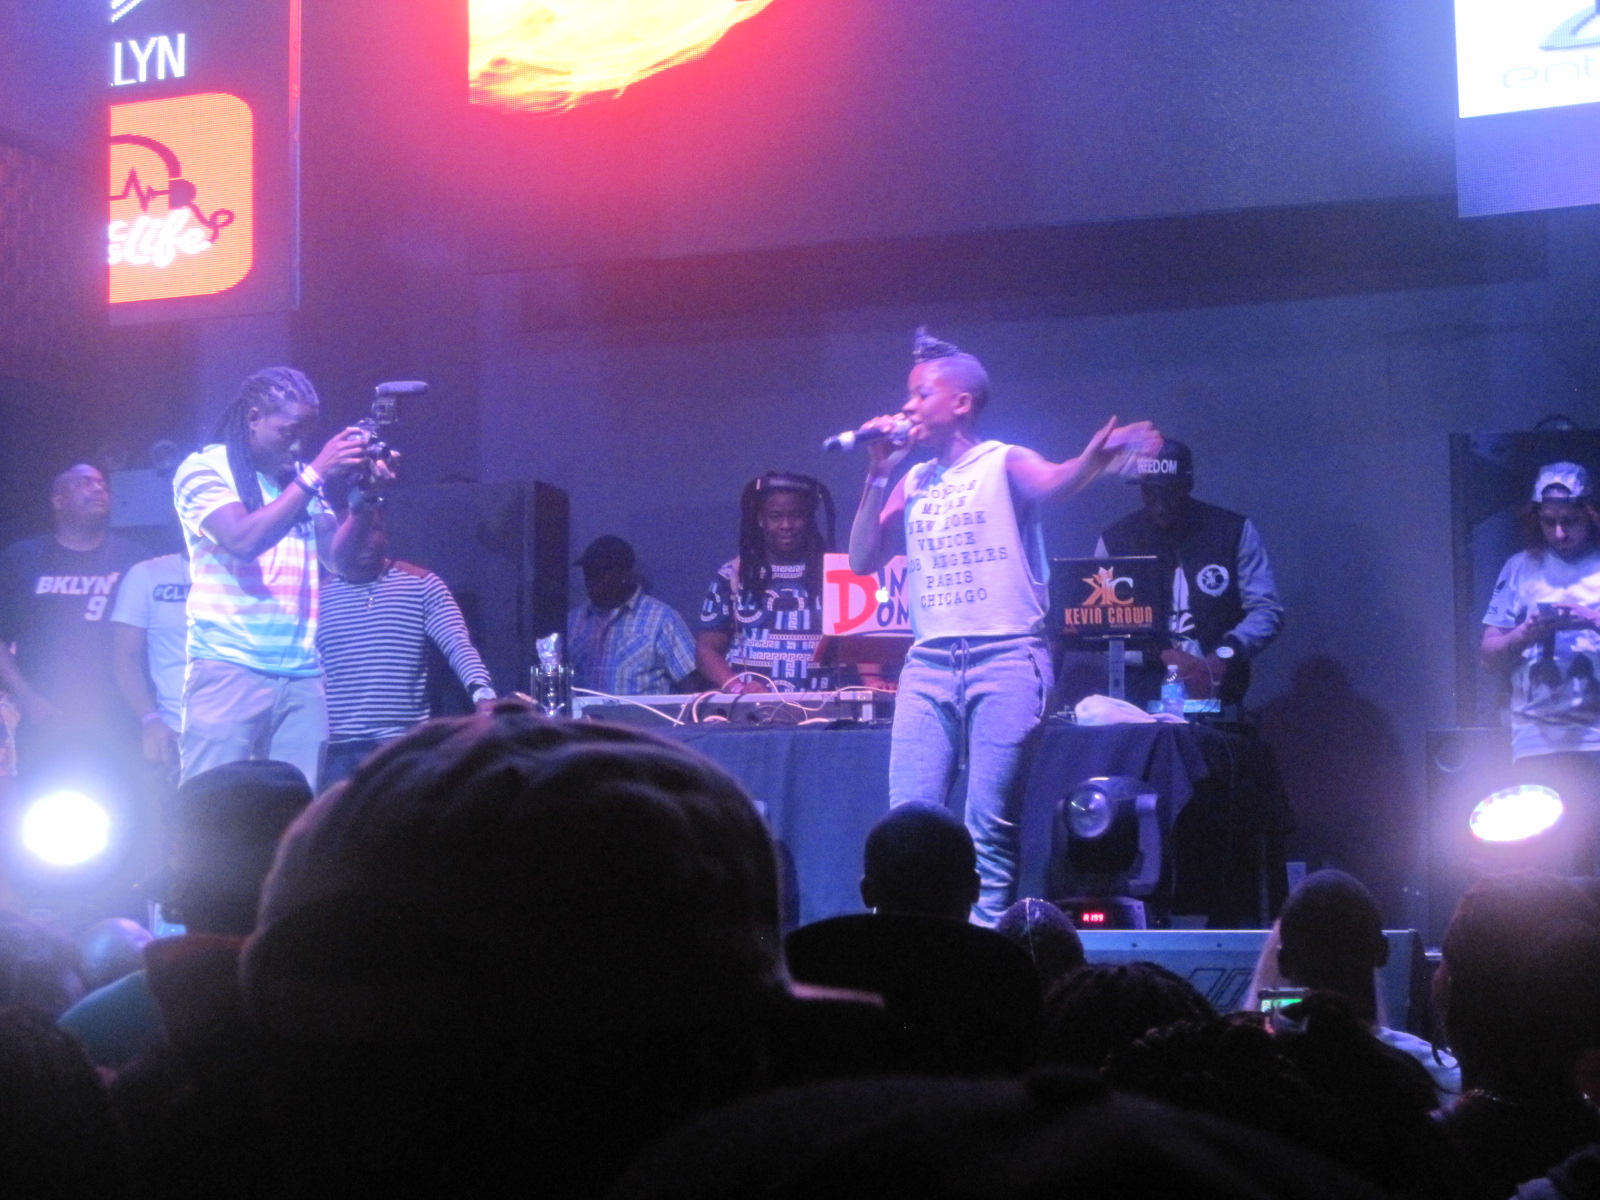   Soca and Dancehall Take Over Stage 48    Hot 97's 5 Alarm Blaze    Read More  